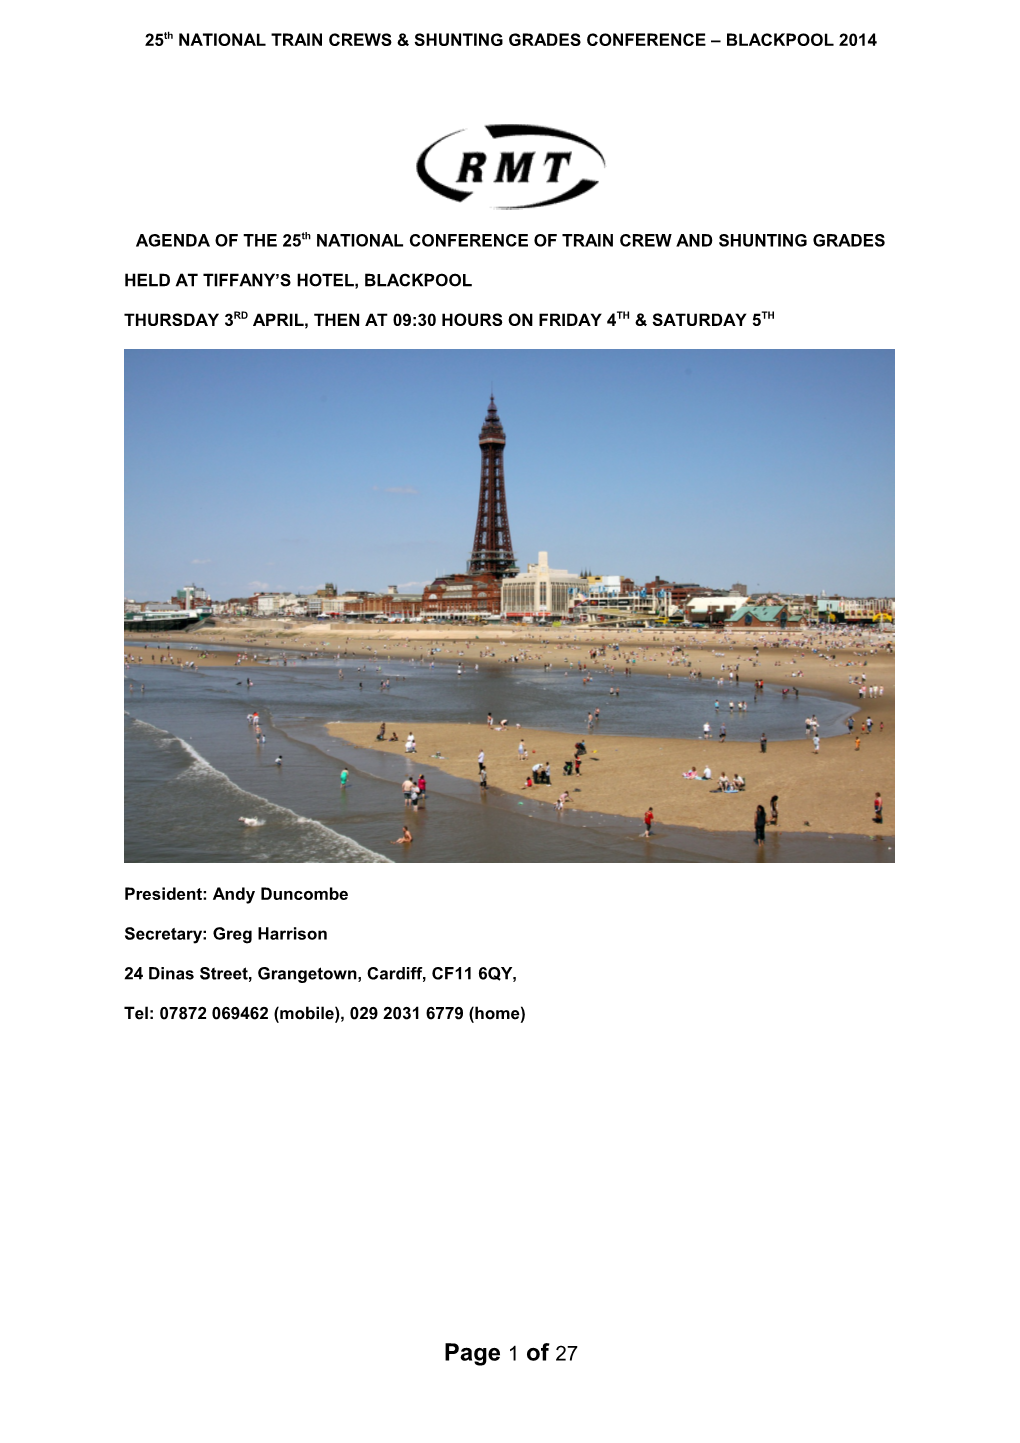 25Th NATIONAL TRAIN CREWS & SHUNTING GRADES CONFERENCE BLACKPOOL 2014